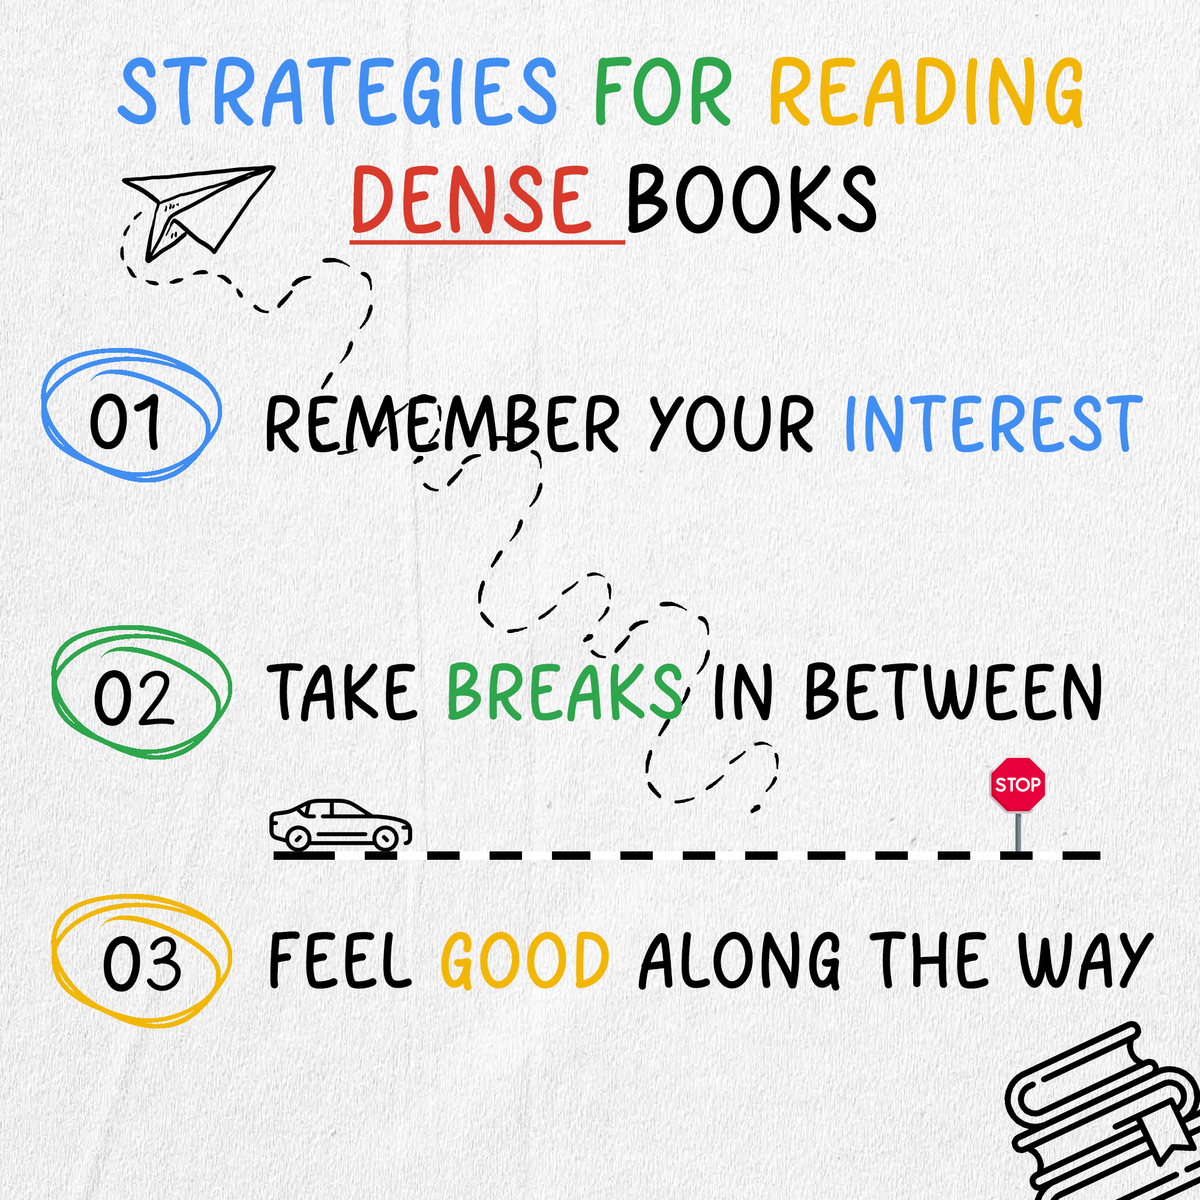 📕The three principles I use to read dense books - Fridays Findings